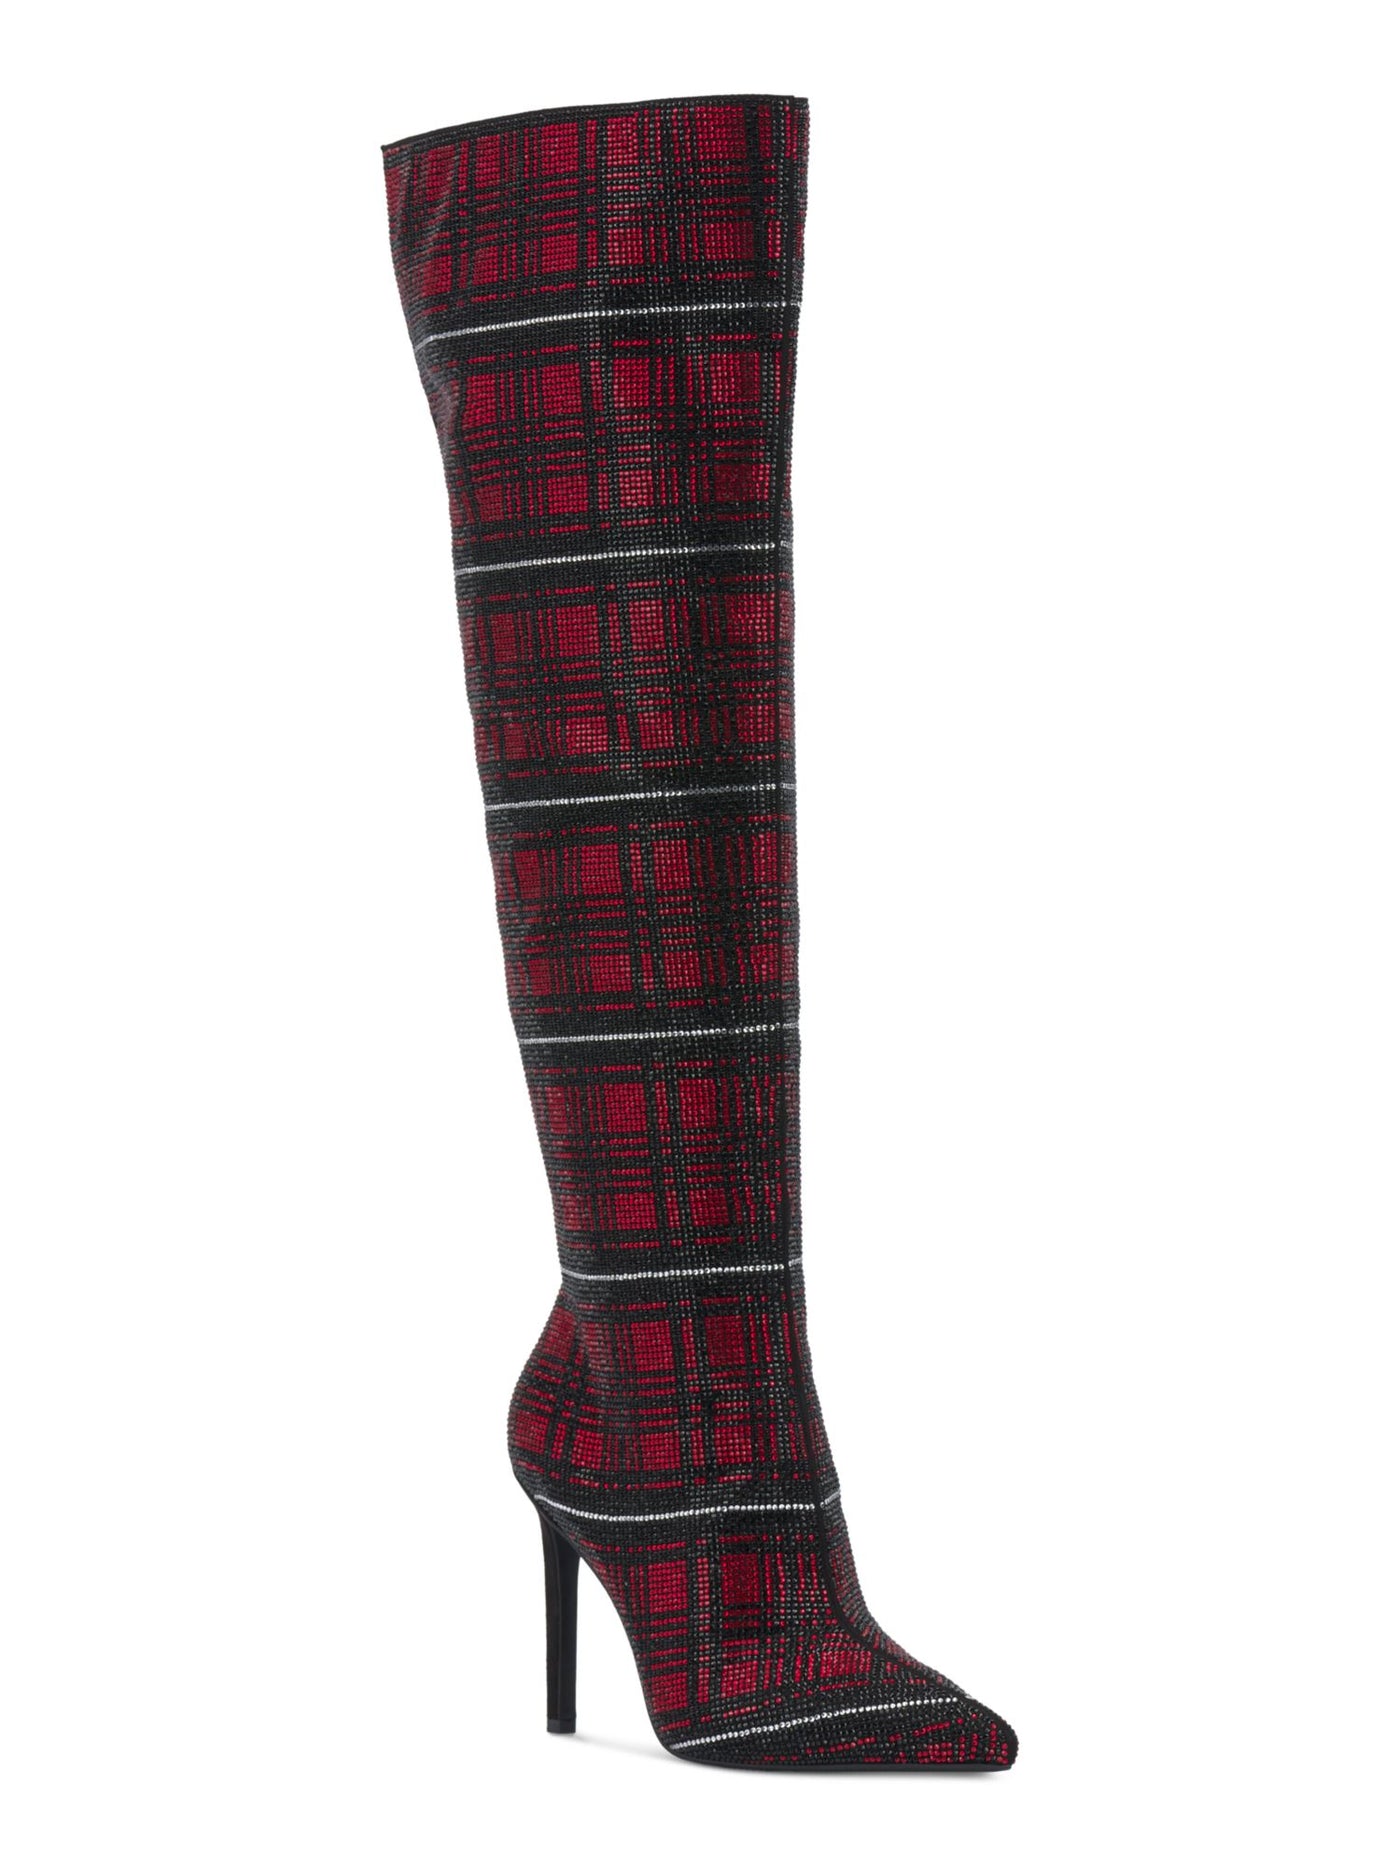 INC Womens Red Plaid Vented Back Padded Rhinestone Goring Saveria Pointed Toe Stiletto Zip-Up Dress Boots 8.5 M